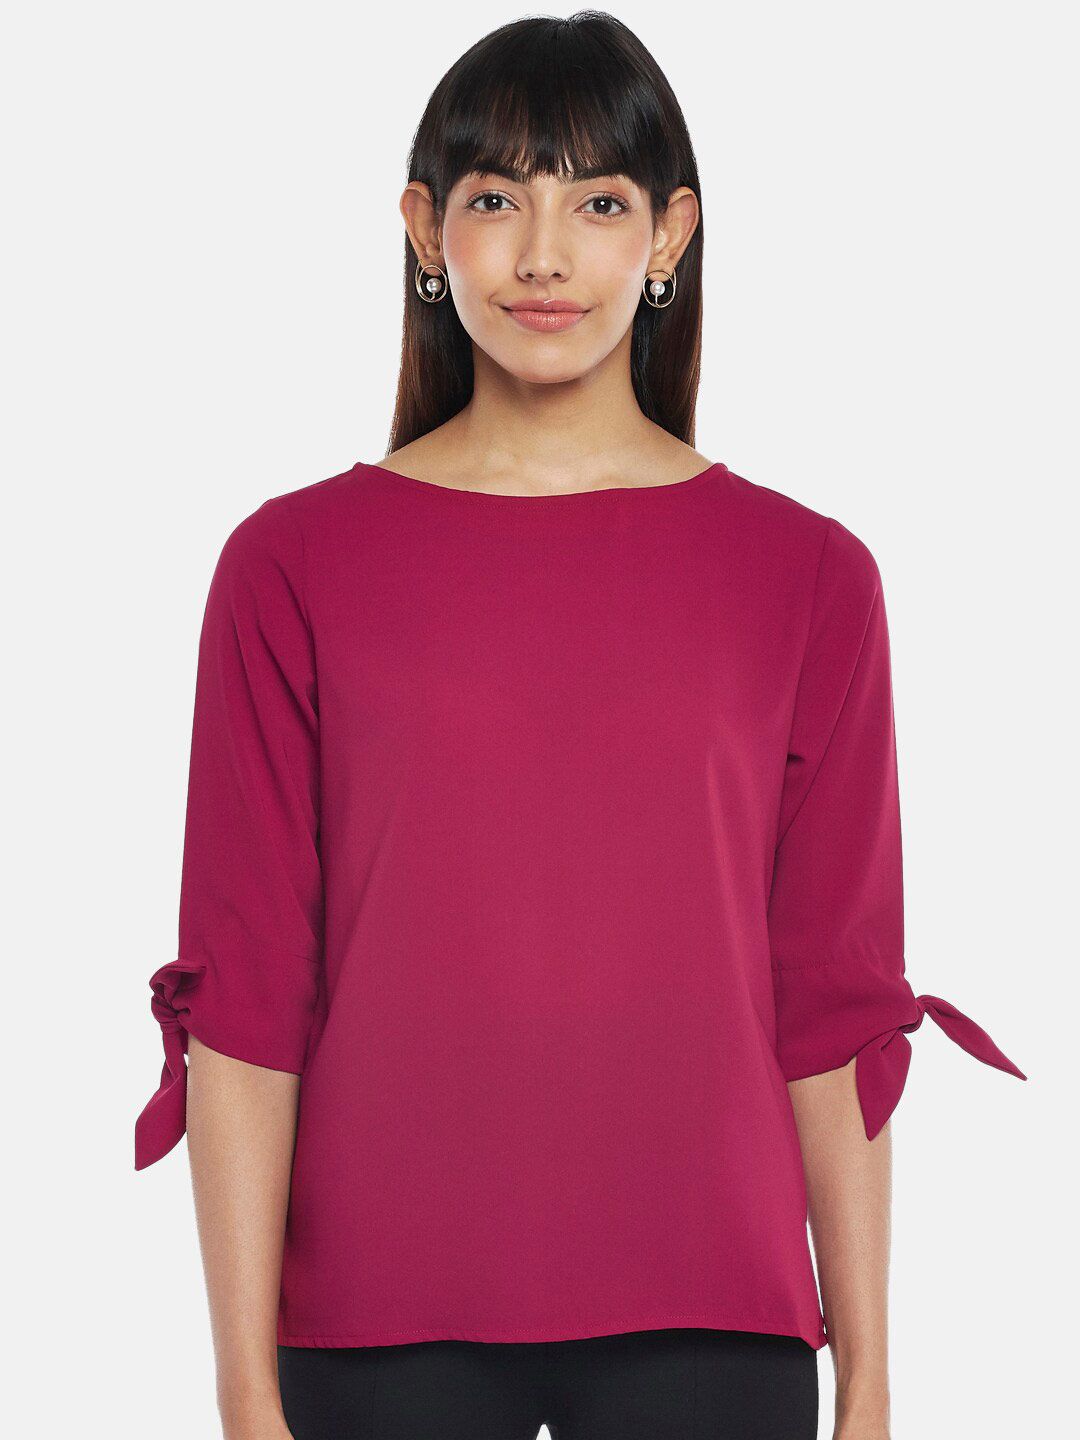 Annabelle by Pantaloons Women Burgundy Solid Polyester Round Neck Top Price in India